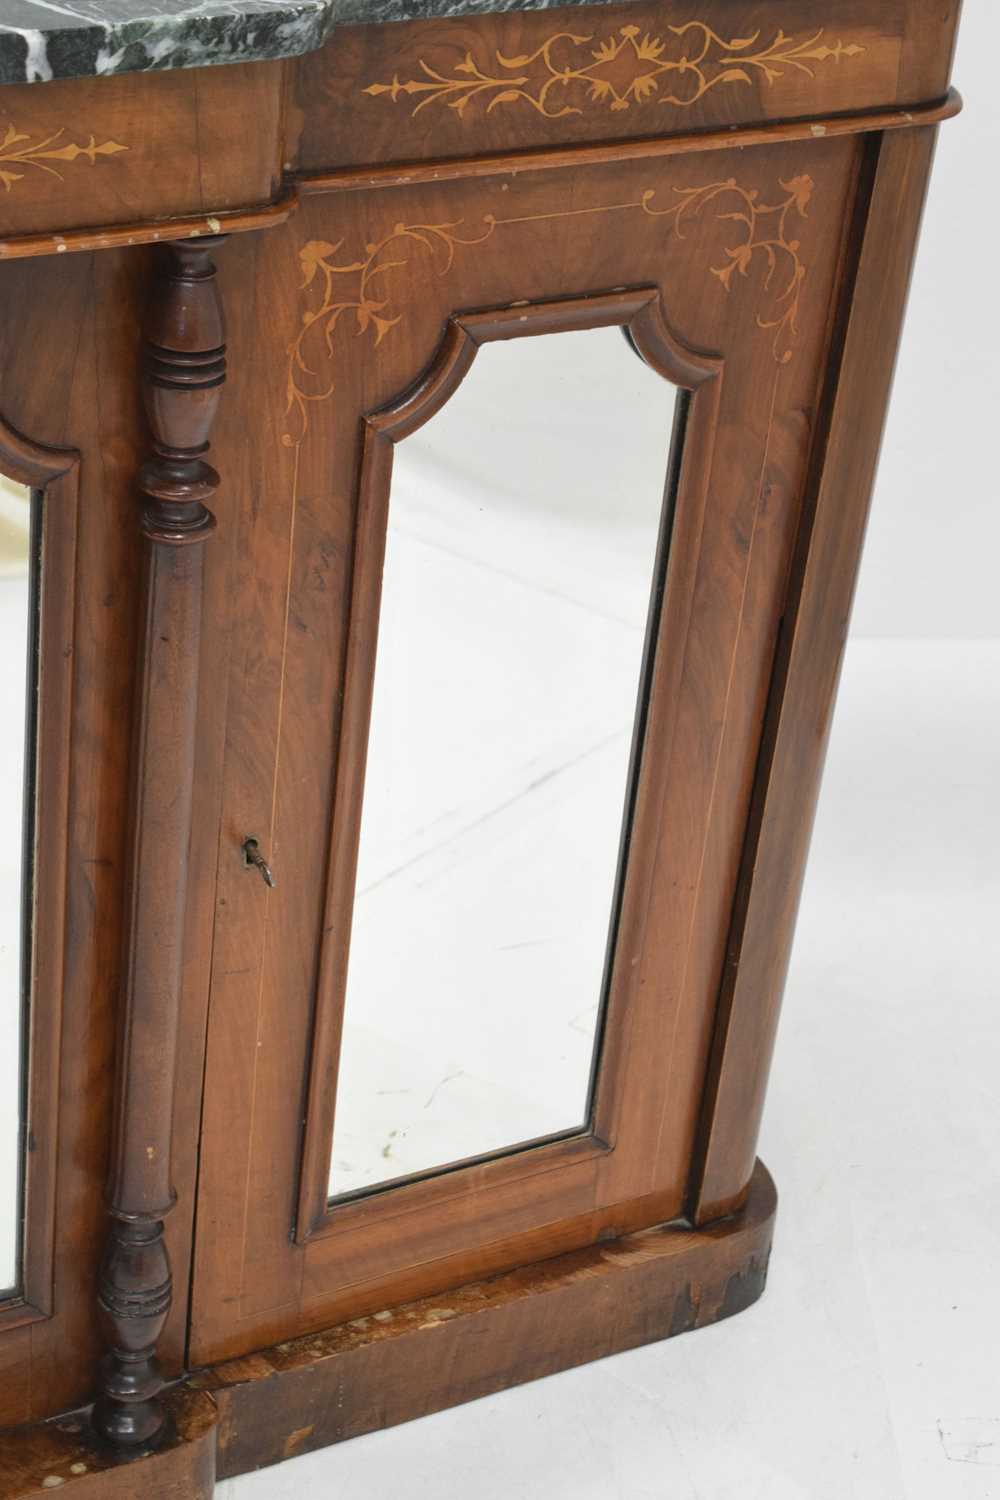 19th century inlaid walnut breakfront credenza or side cabinet with marble top - Image 5 of 13